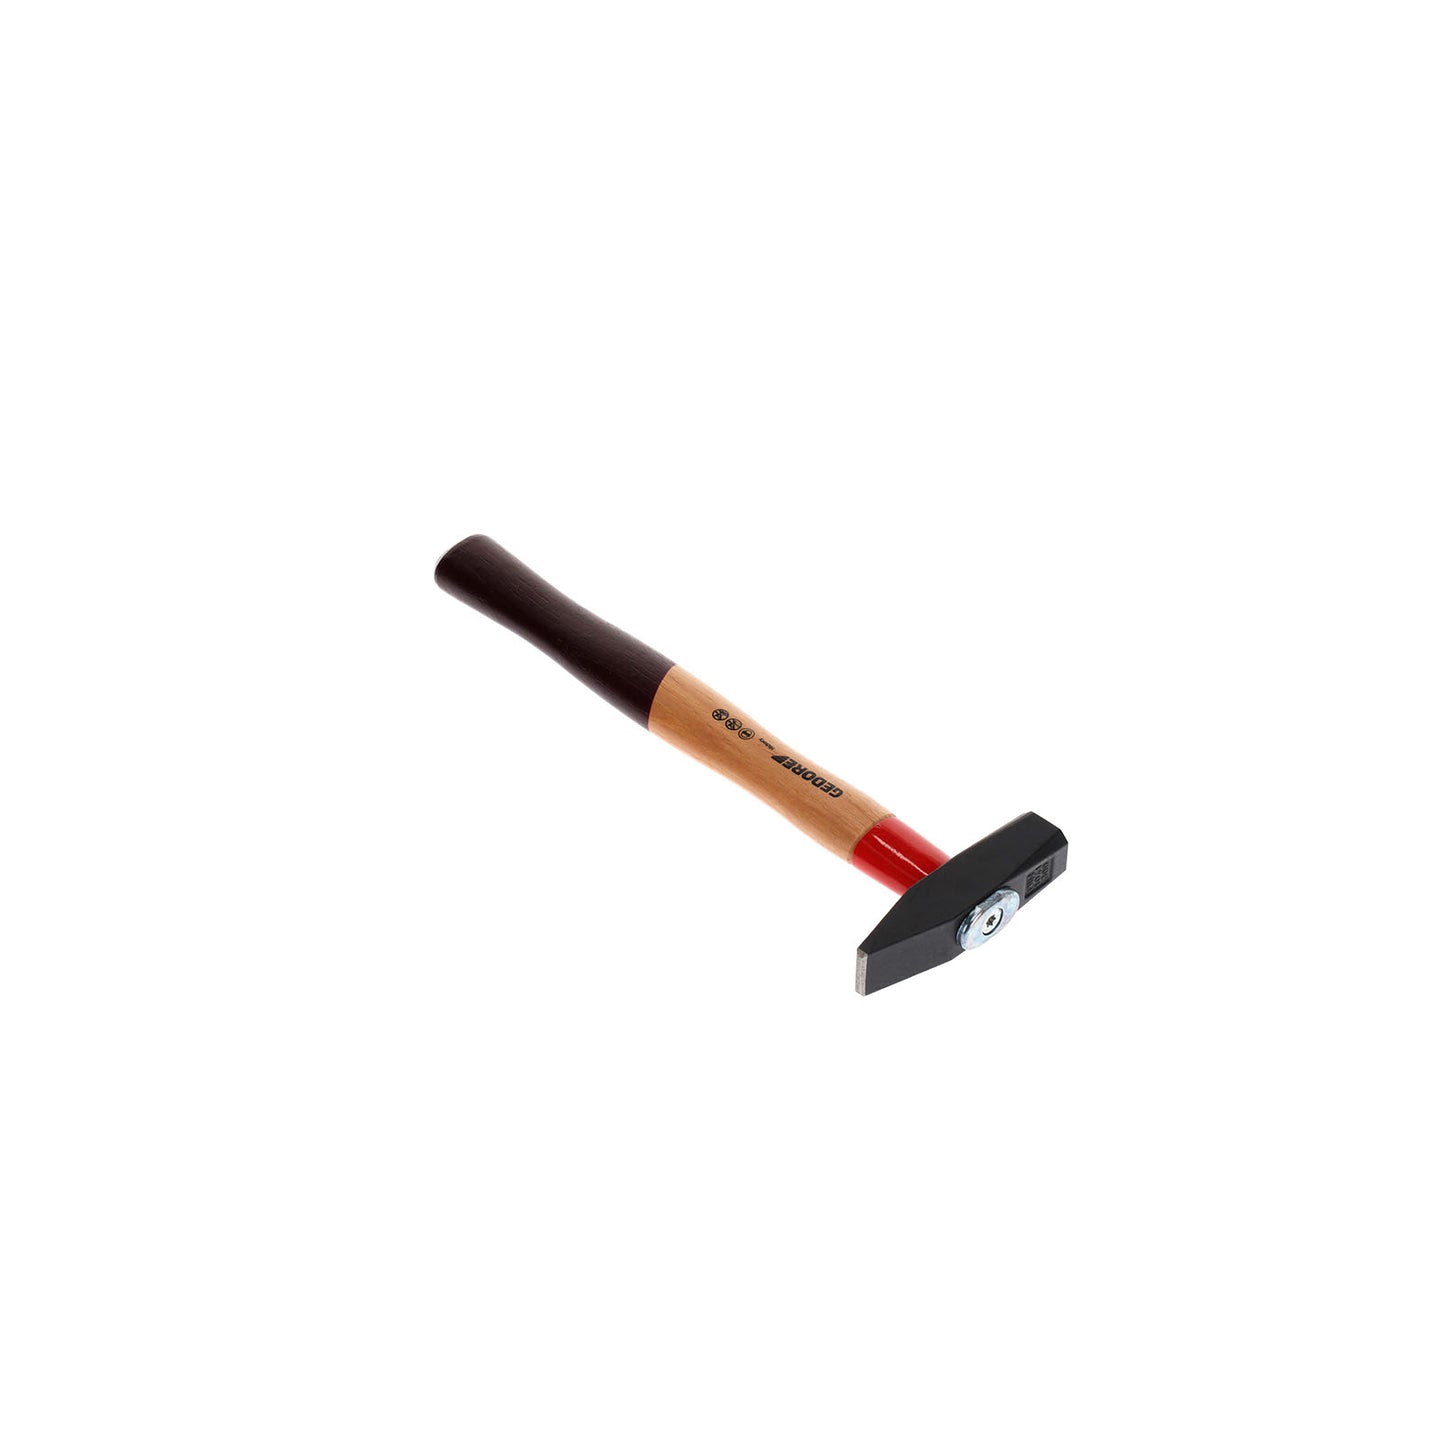 GEDORE 600 H-300 - ROTBAND assembly hammer 300g (8583070)